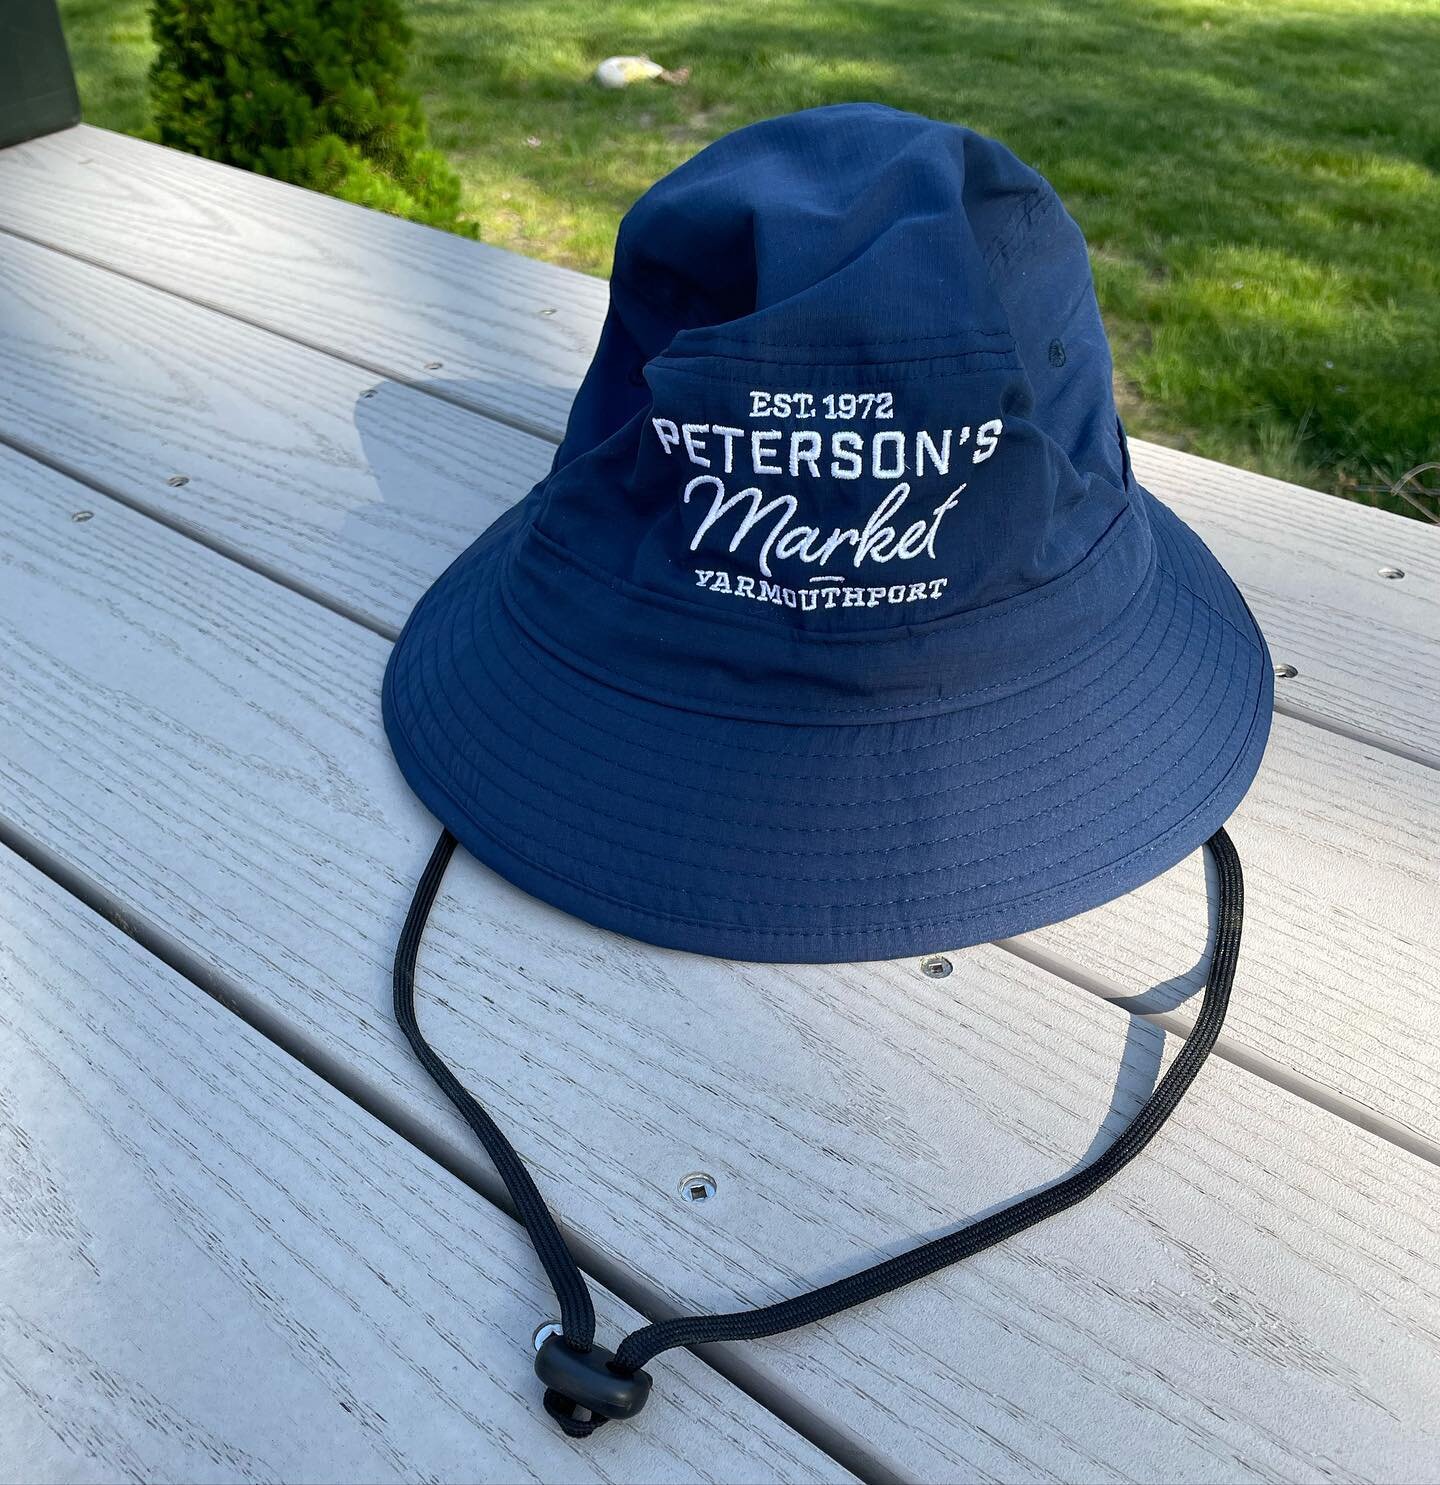 New this year! Peterson&rsquo;s bucket hats! Front and back views. Just arrived! Grab yours on your next visit. #petersonsmarket #yarmouth #yarmouthport #capecod #eatlocalcapecod #shoplocalcapecod